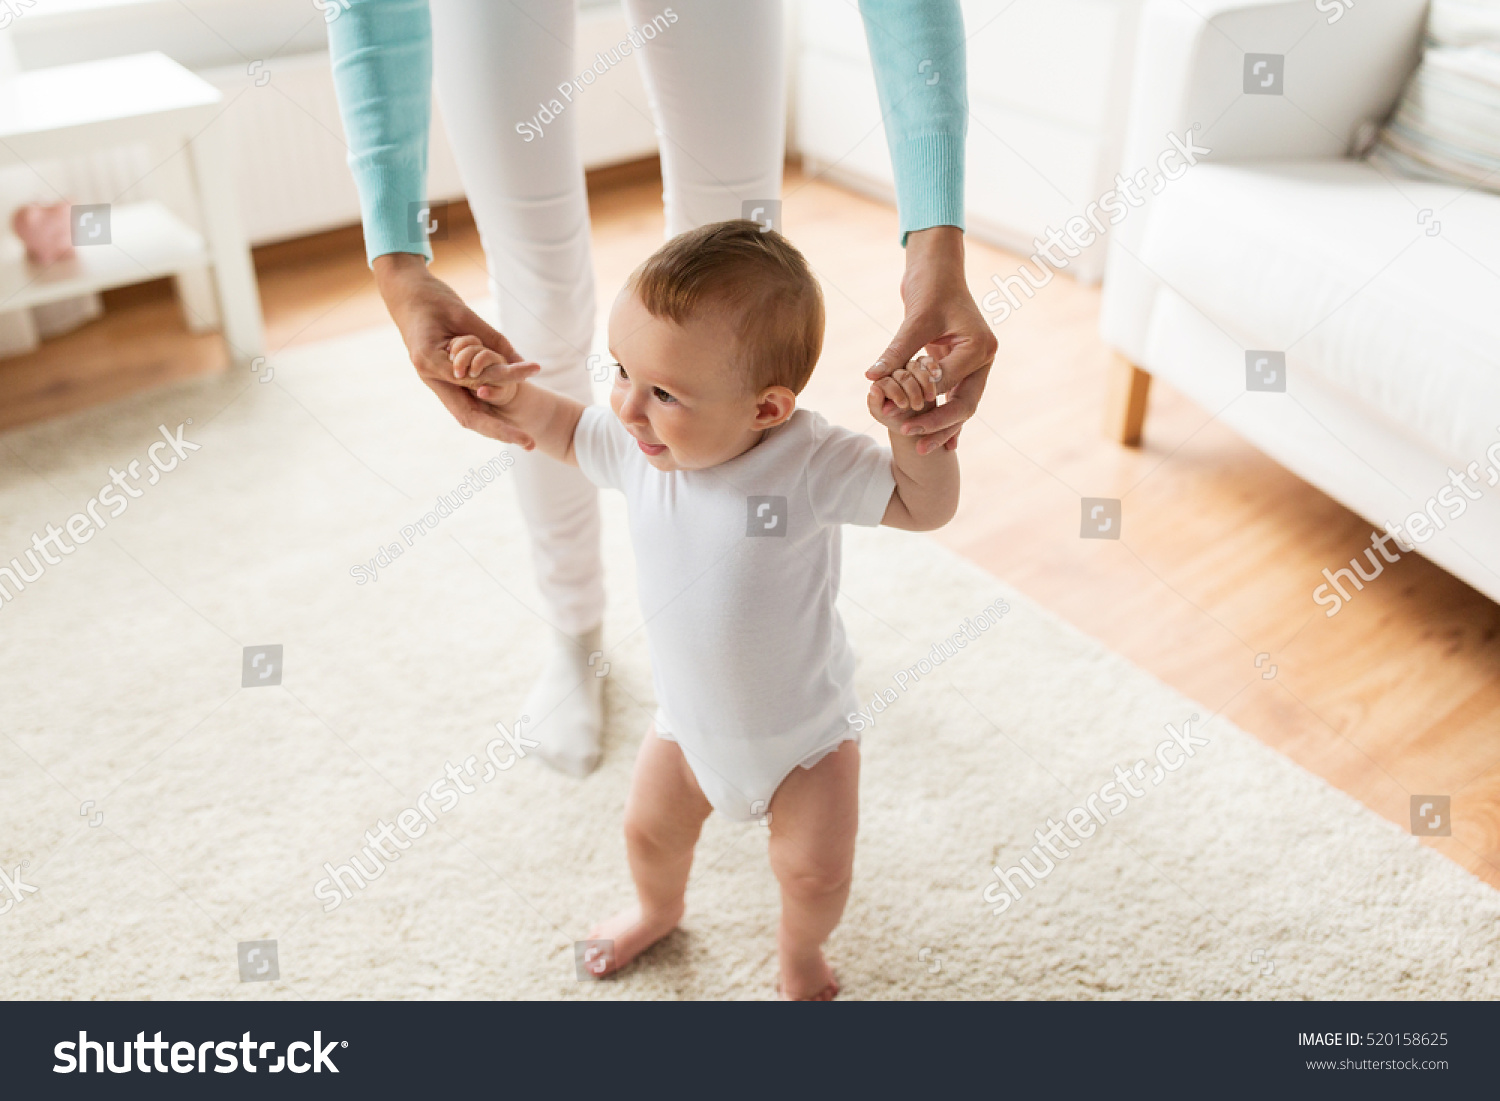 stock-photo-family-child-childhood-and-parenthood-concept-happy-little-baby-learning-to-walk-with-mother-520158625.jpg